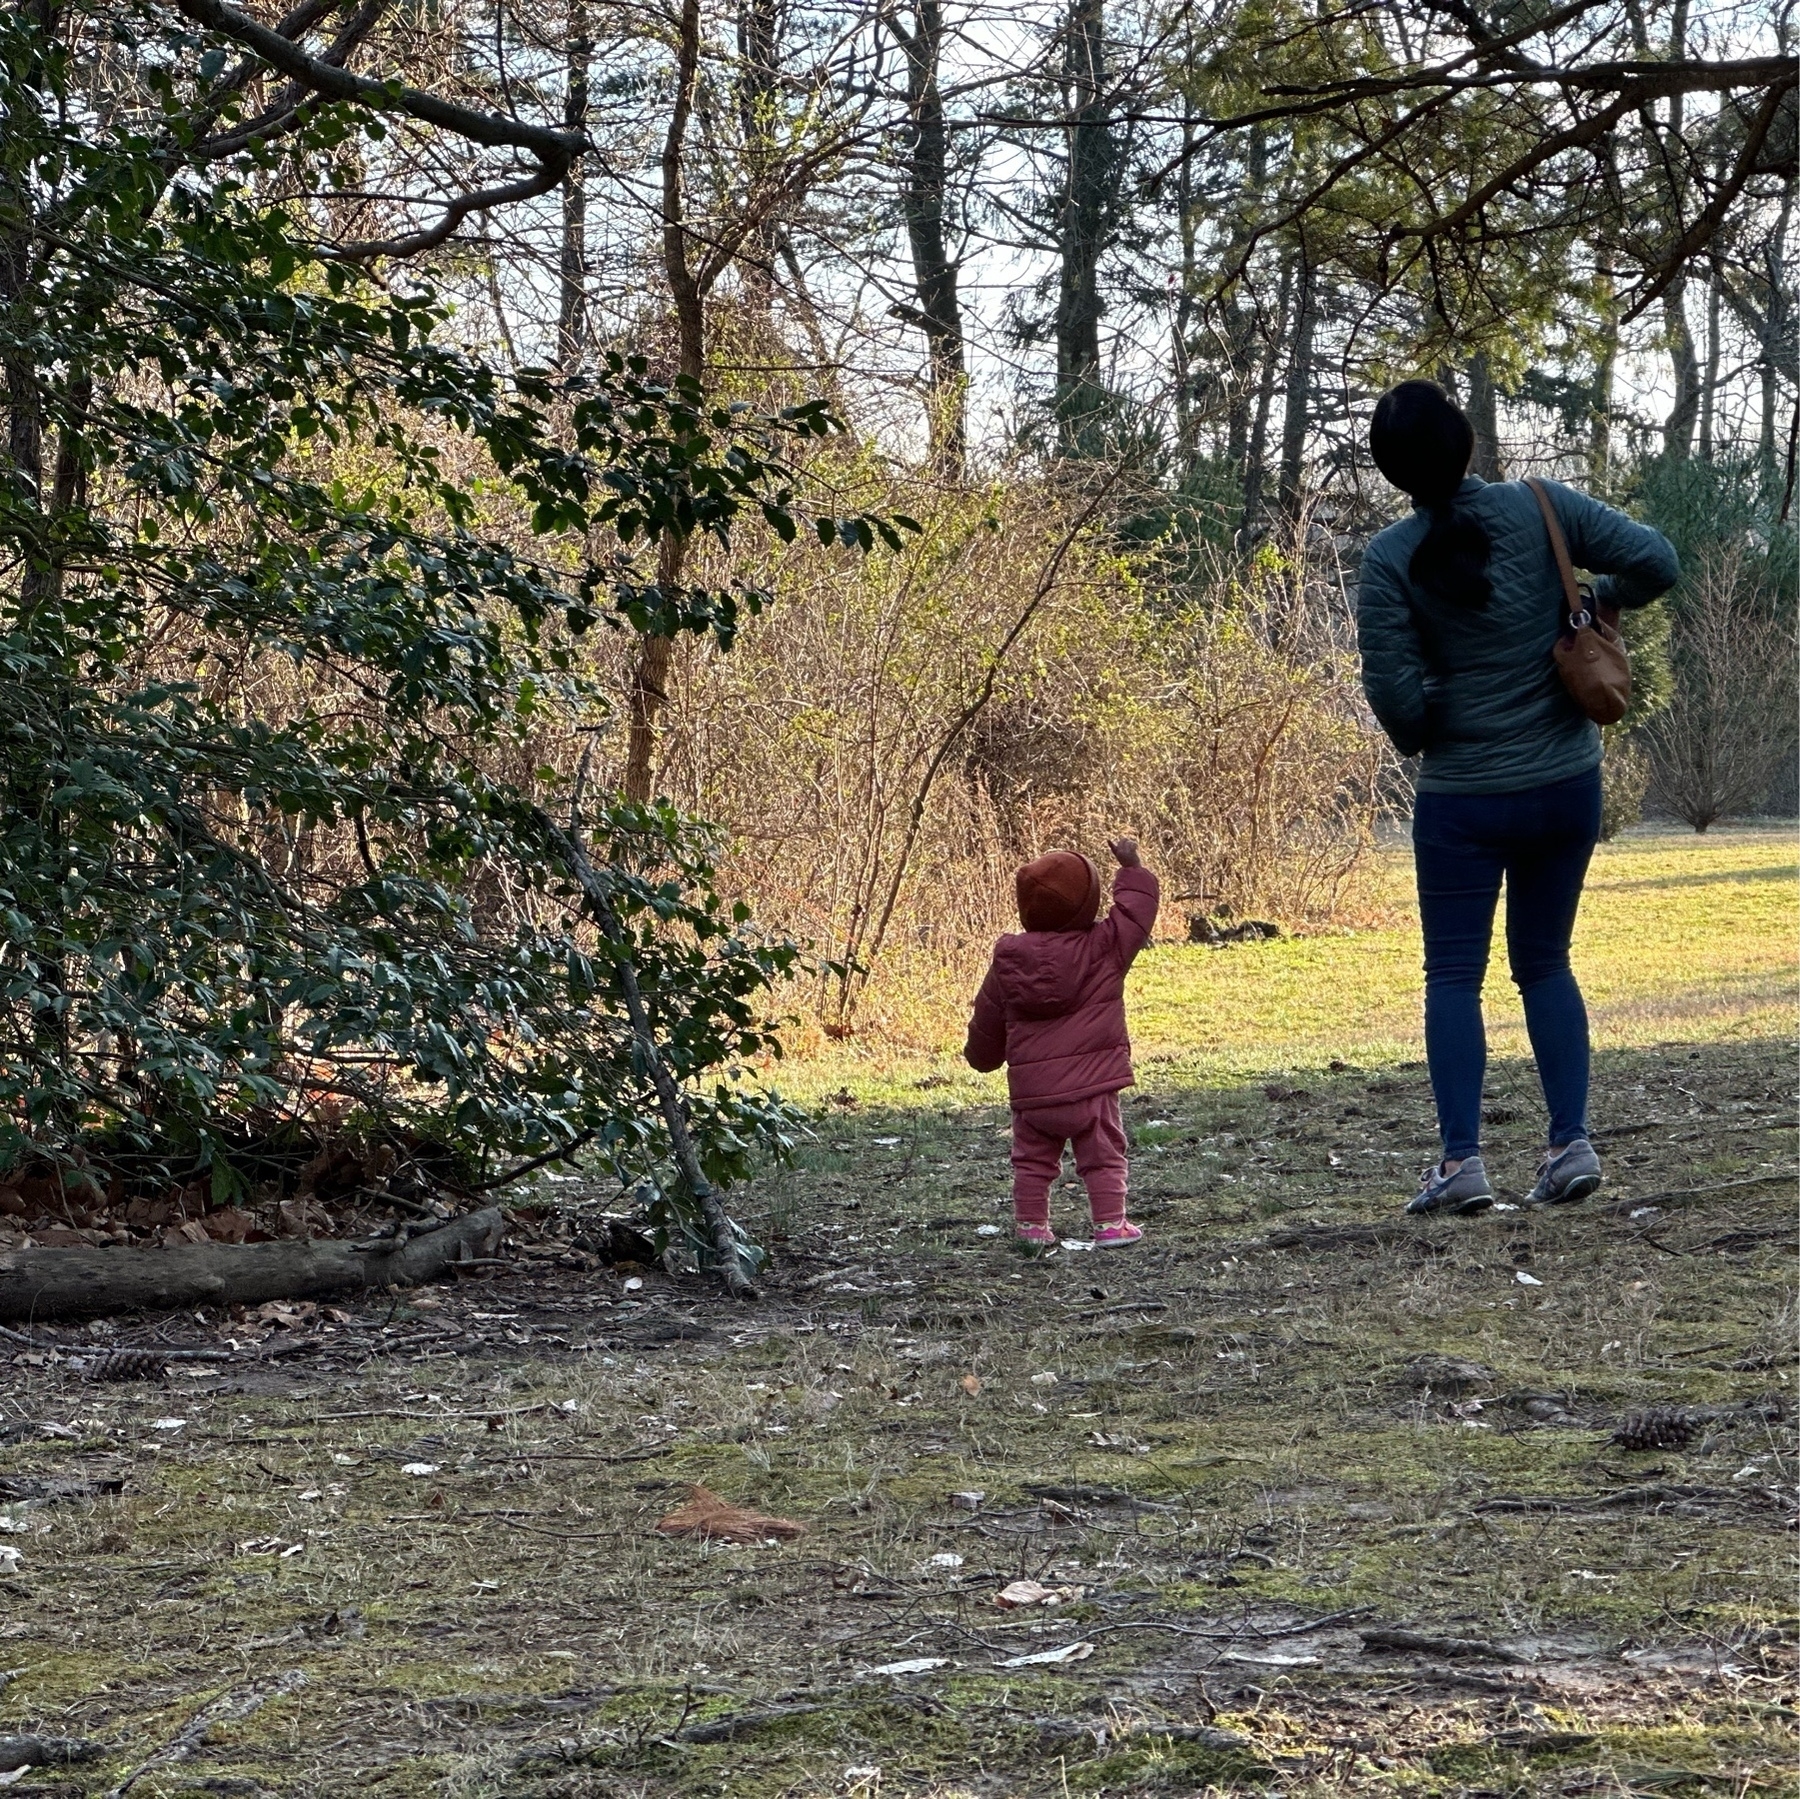 Adult and toddler in a field looking up at a tree.